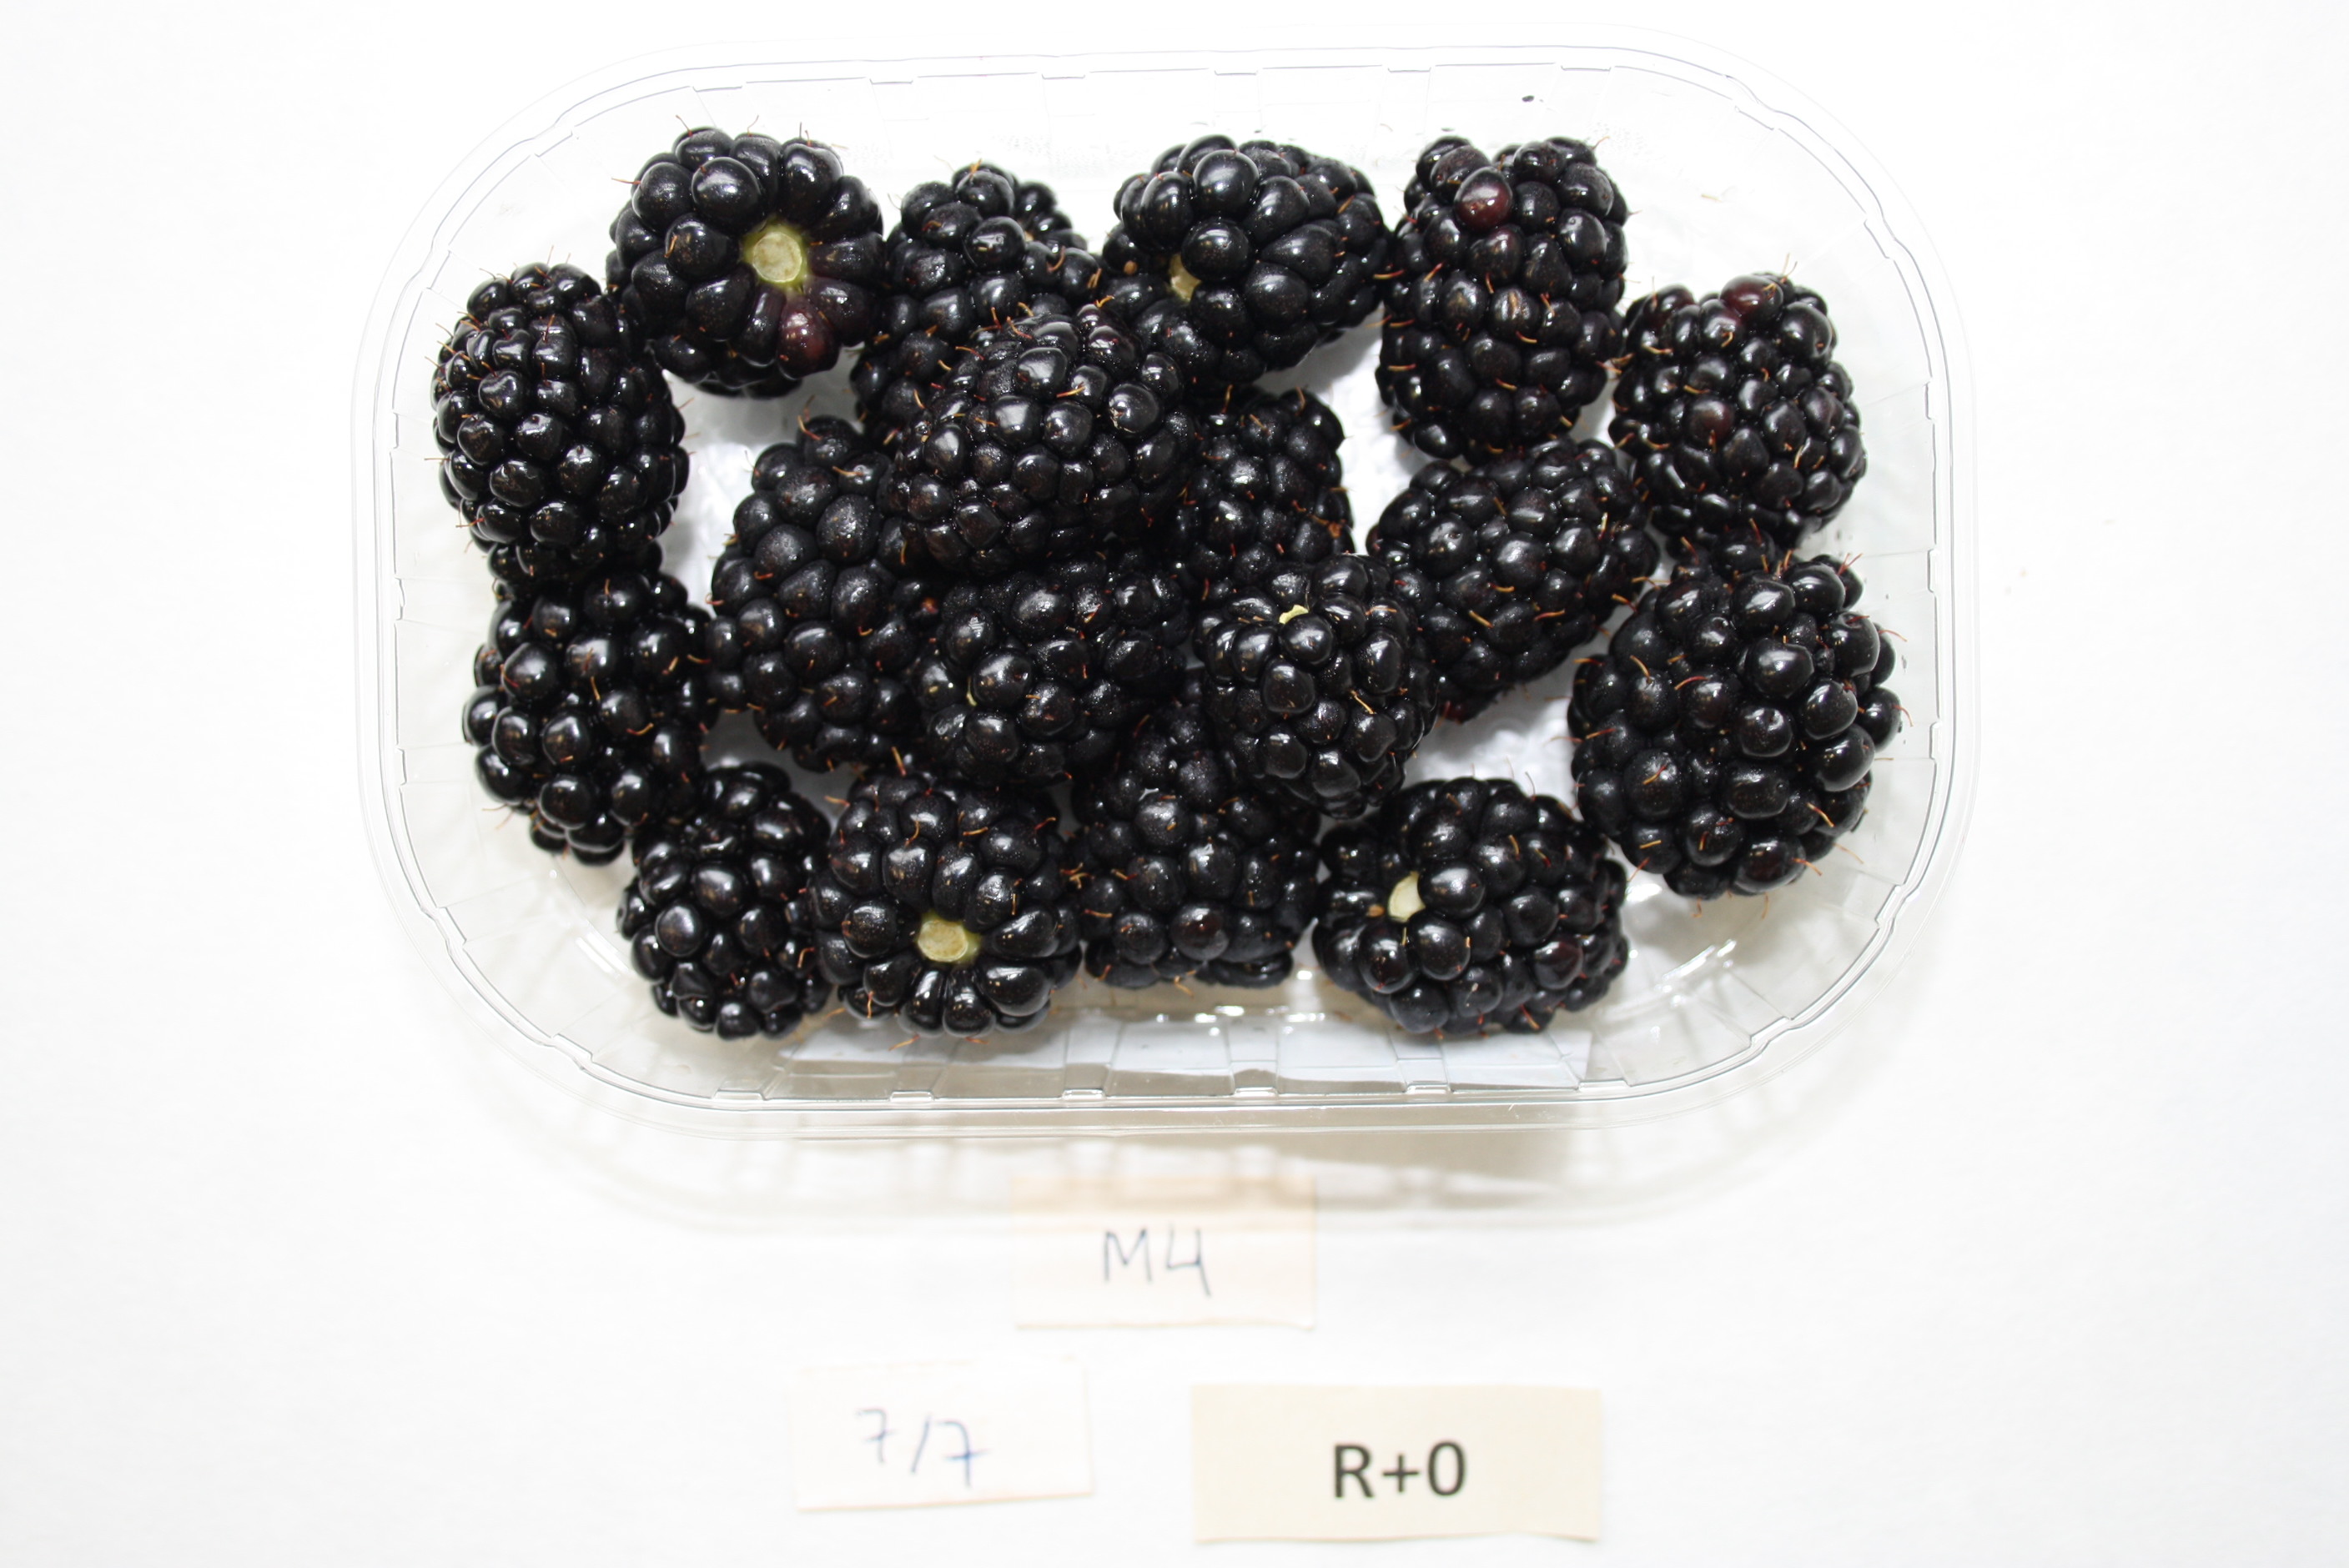 Blackberry variety cultivated